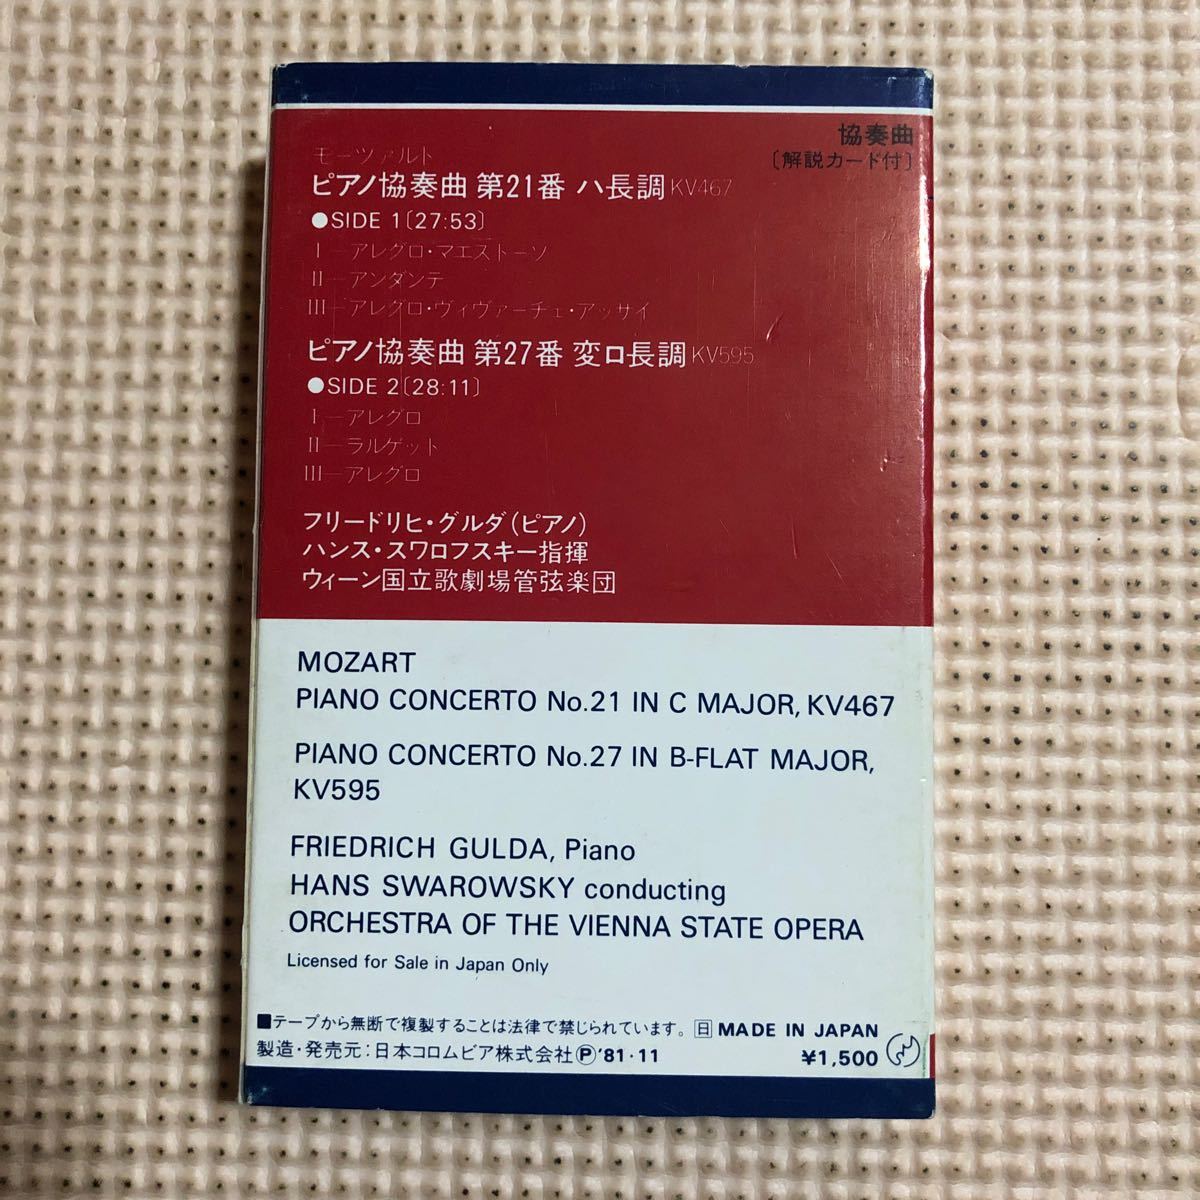 mo-tsaruto piano concerto no. 21 number,27 number Freed lihi*gruda[ piano ] Swarovski finger ., we n orchestral music . domestic record cassette tape #